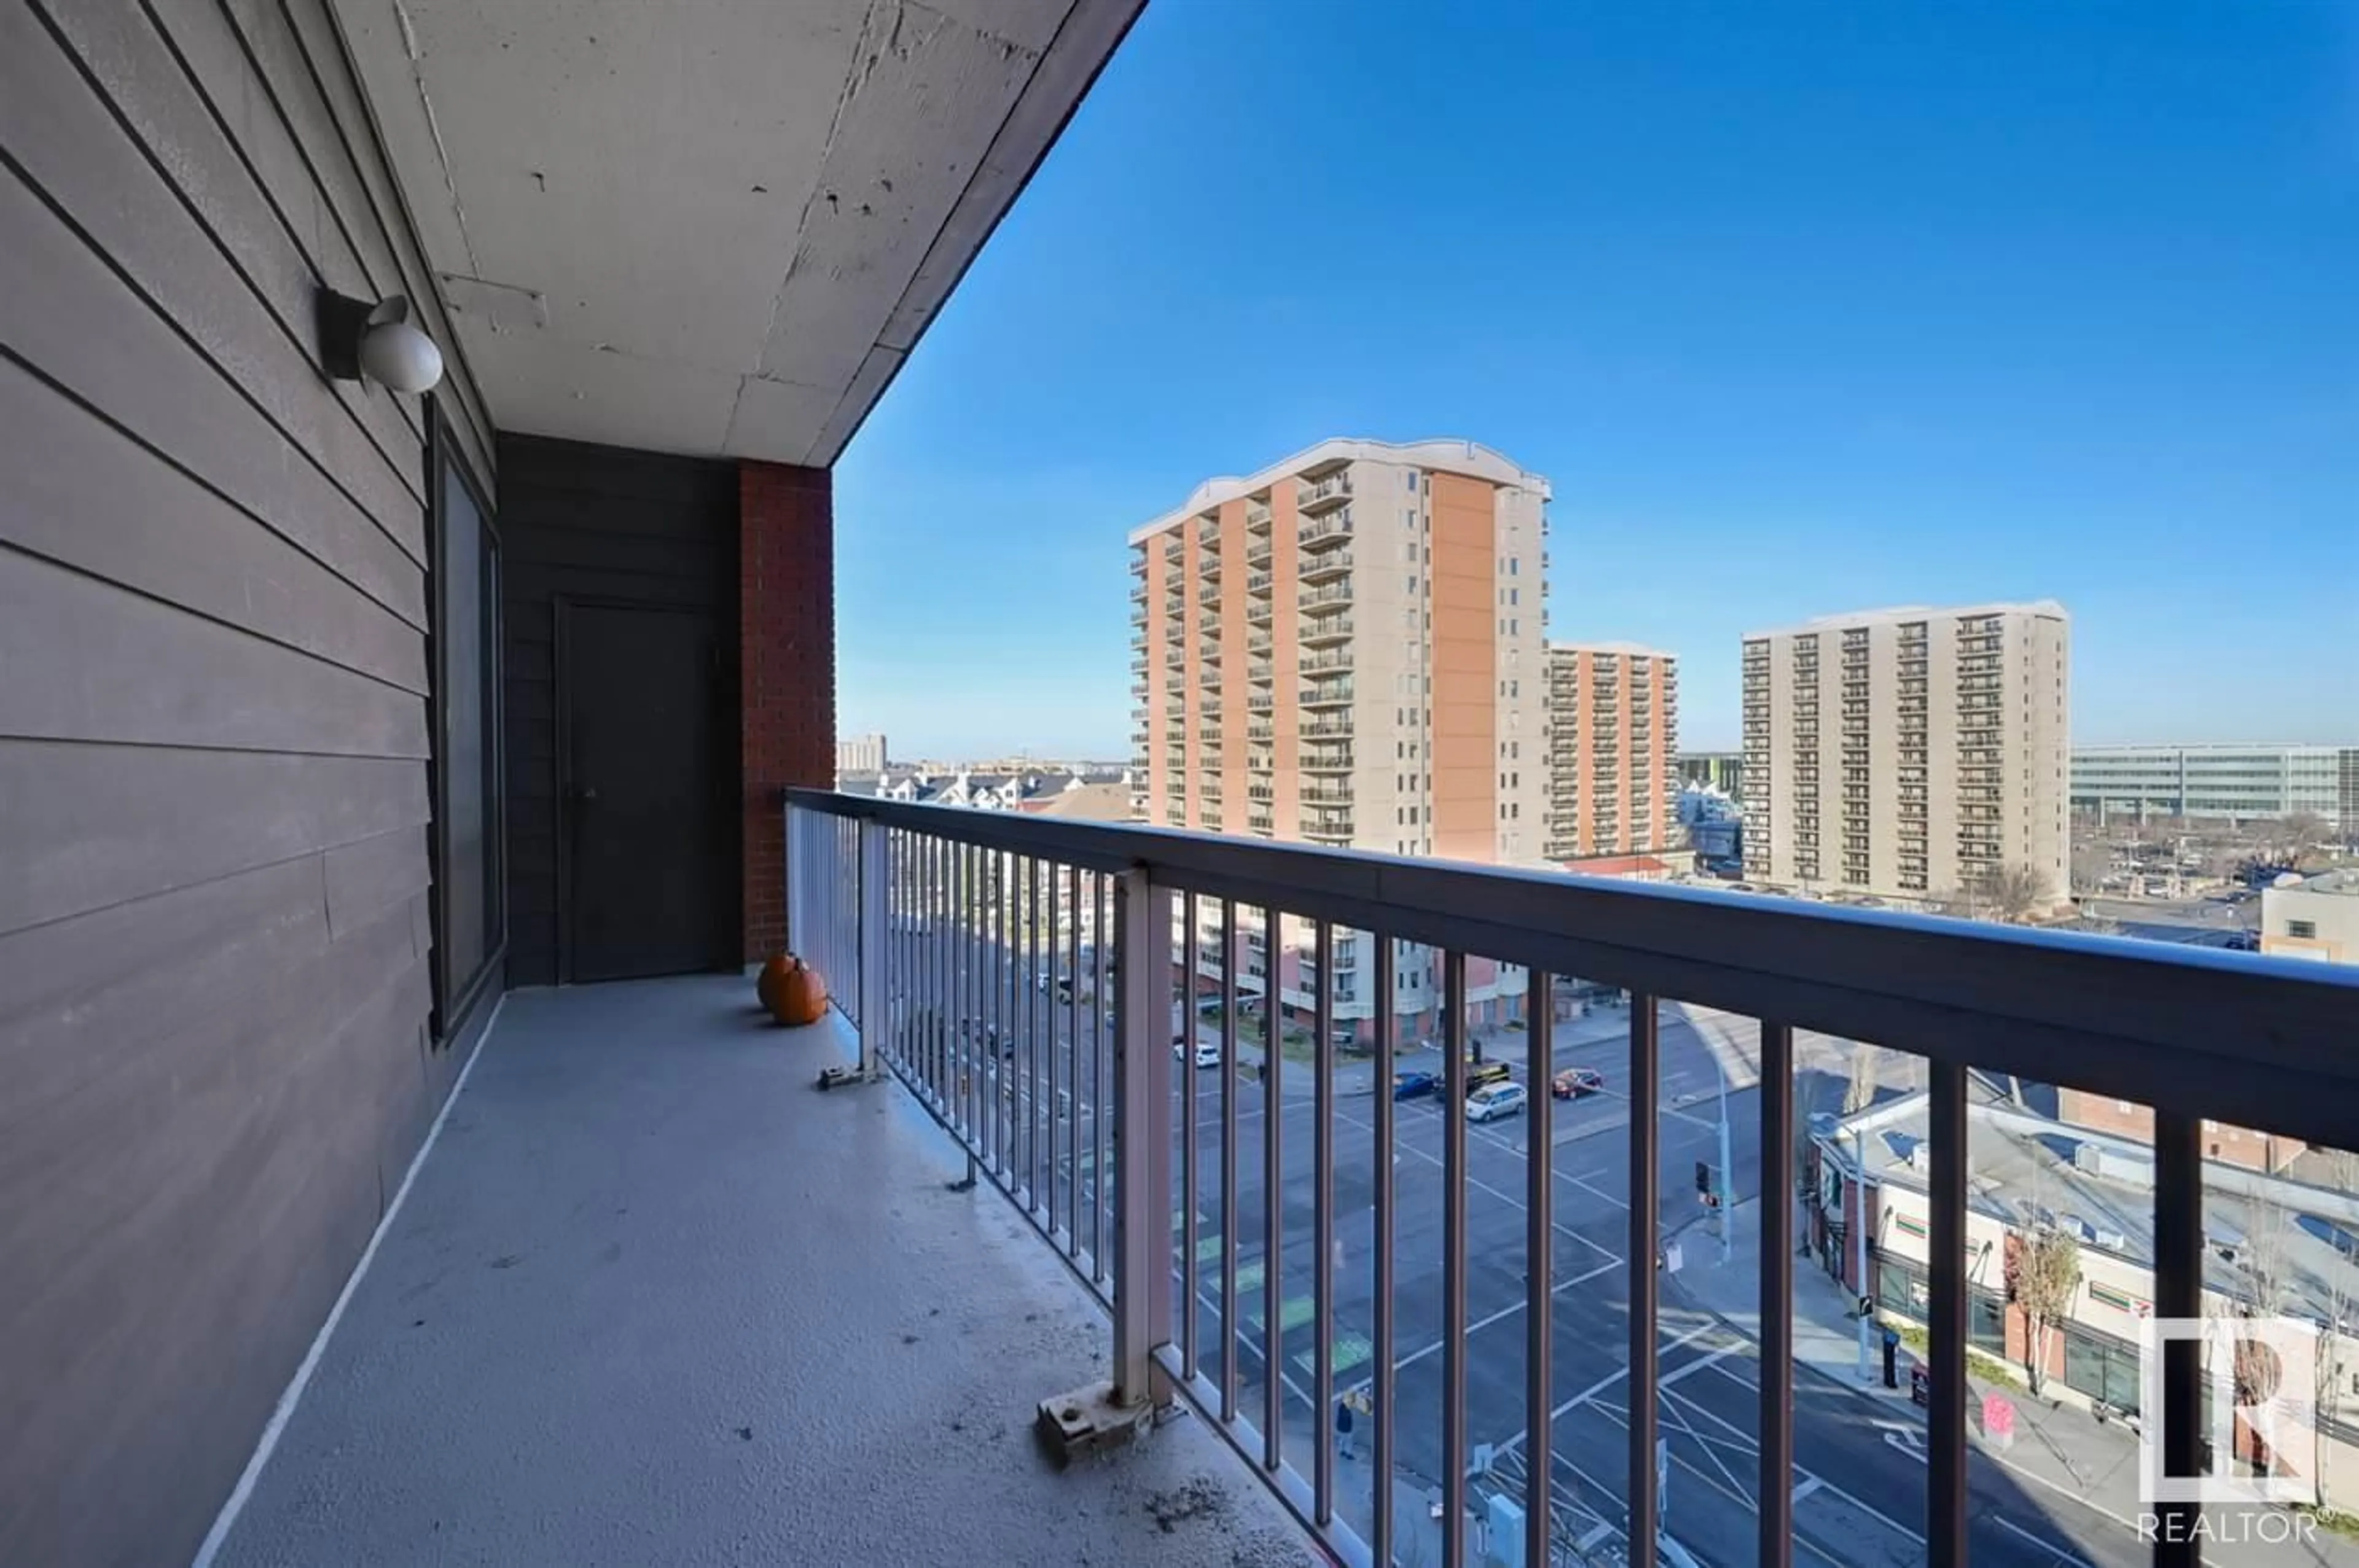 Balcony in the apartment for #802 10175 109 ST NW, Edmonton Alberta T5J3P2